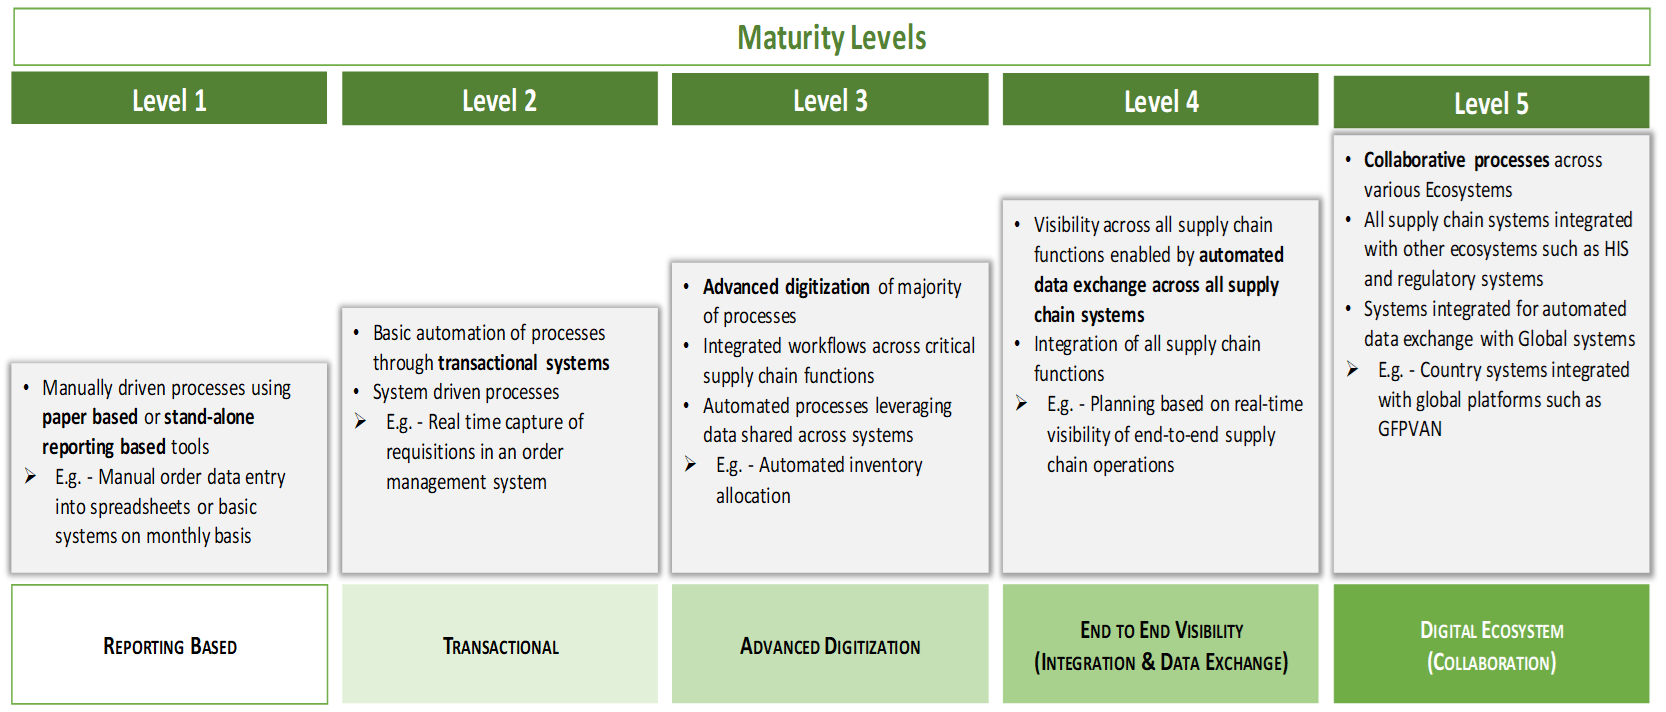 Supply Chain Information System Maturity Model Usaid Global Health Supply Chain Program 8917